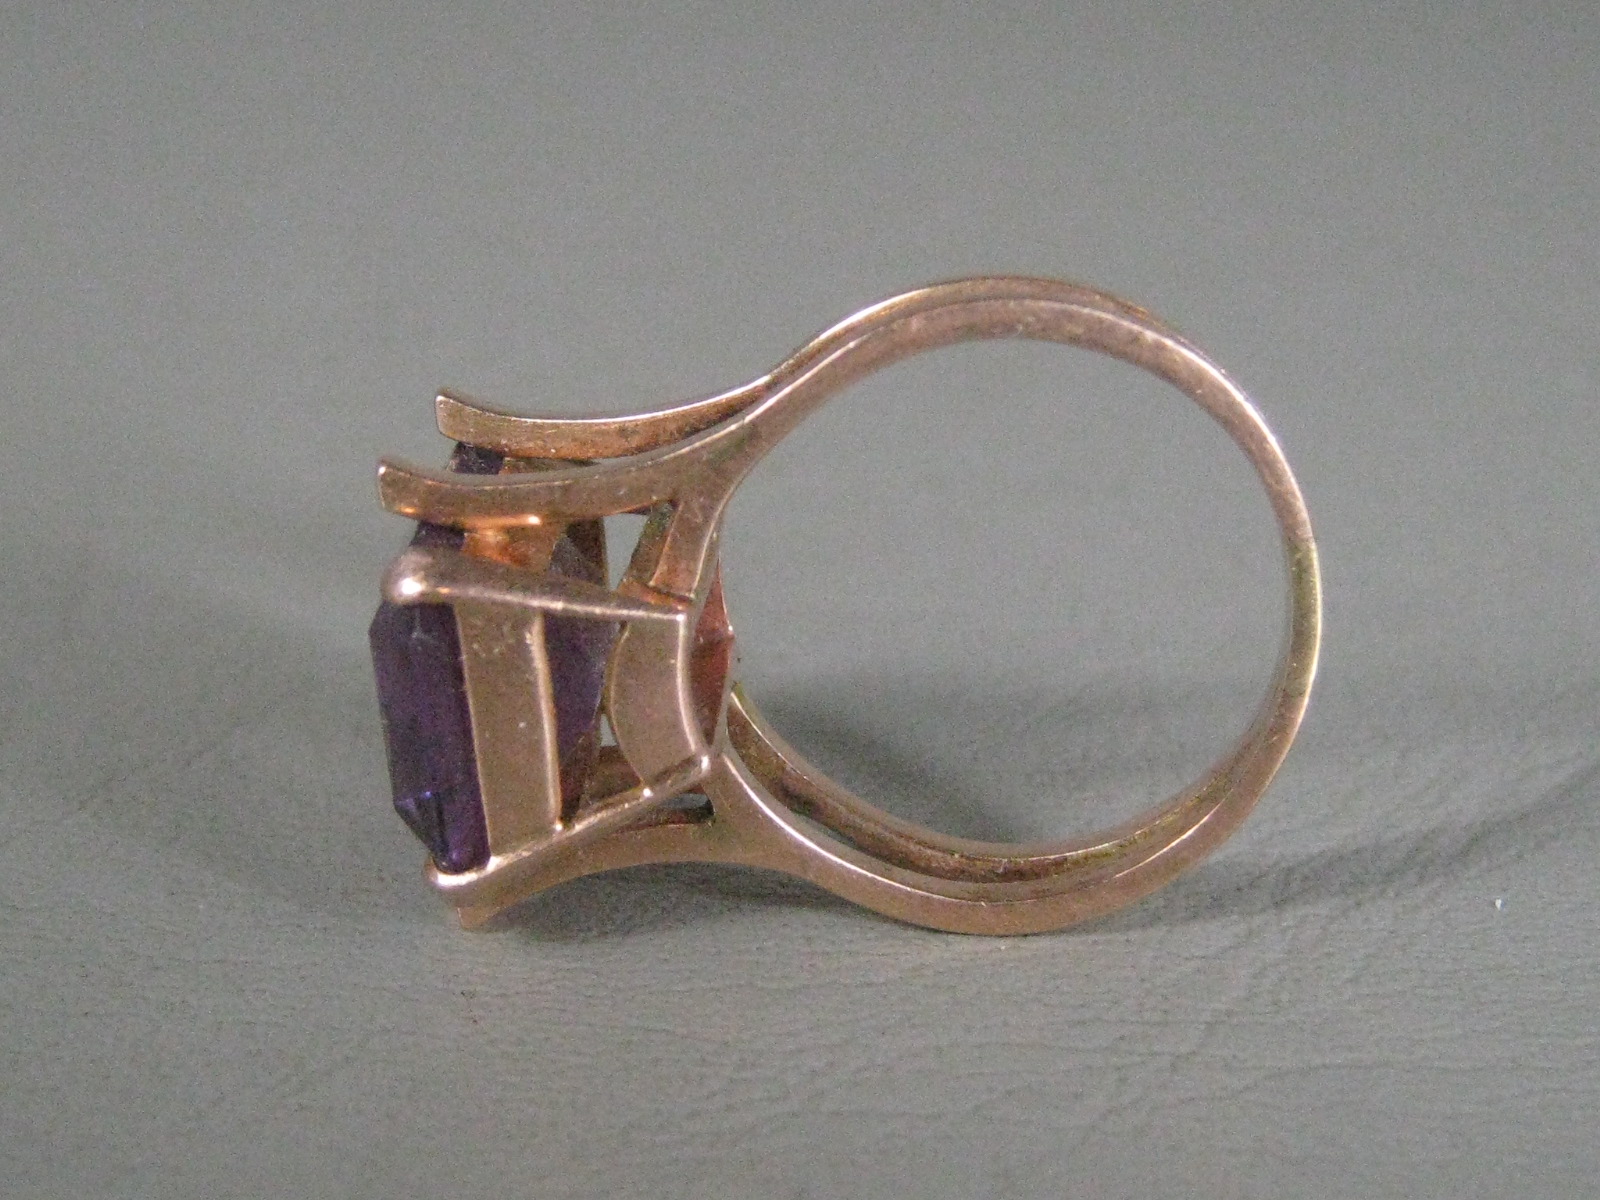 Vintage Antique Amethyst Ring Size 8.25 Estate Jewelry Rose Gold? No Reserve! 8